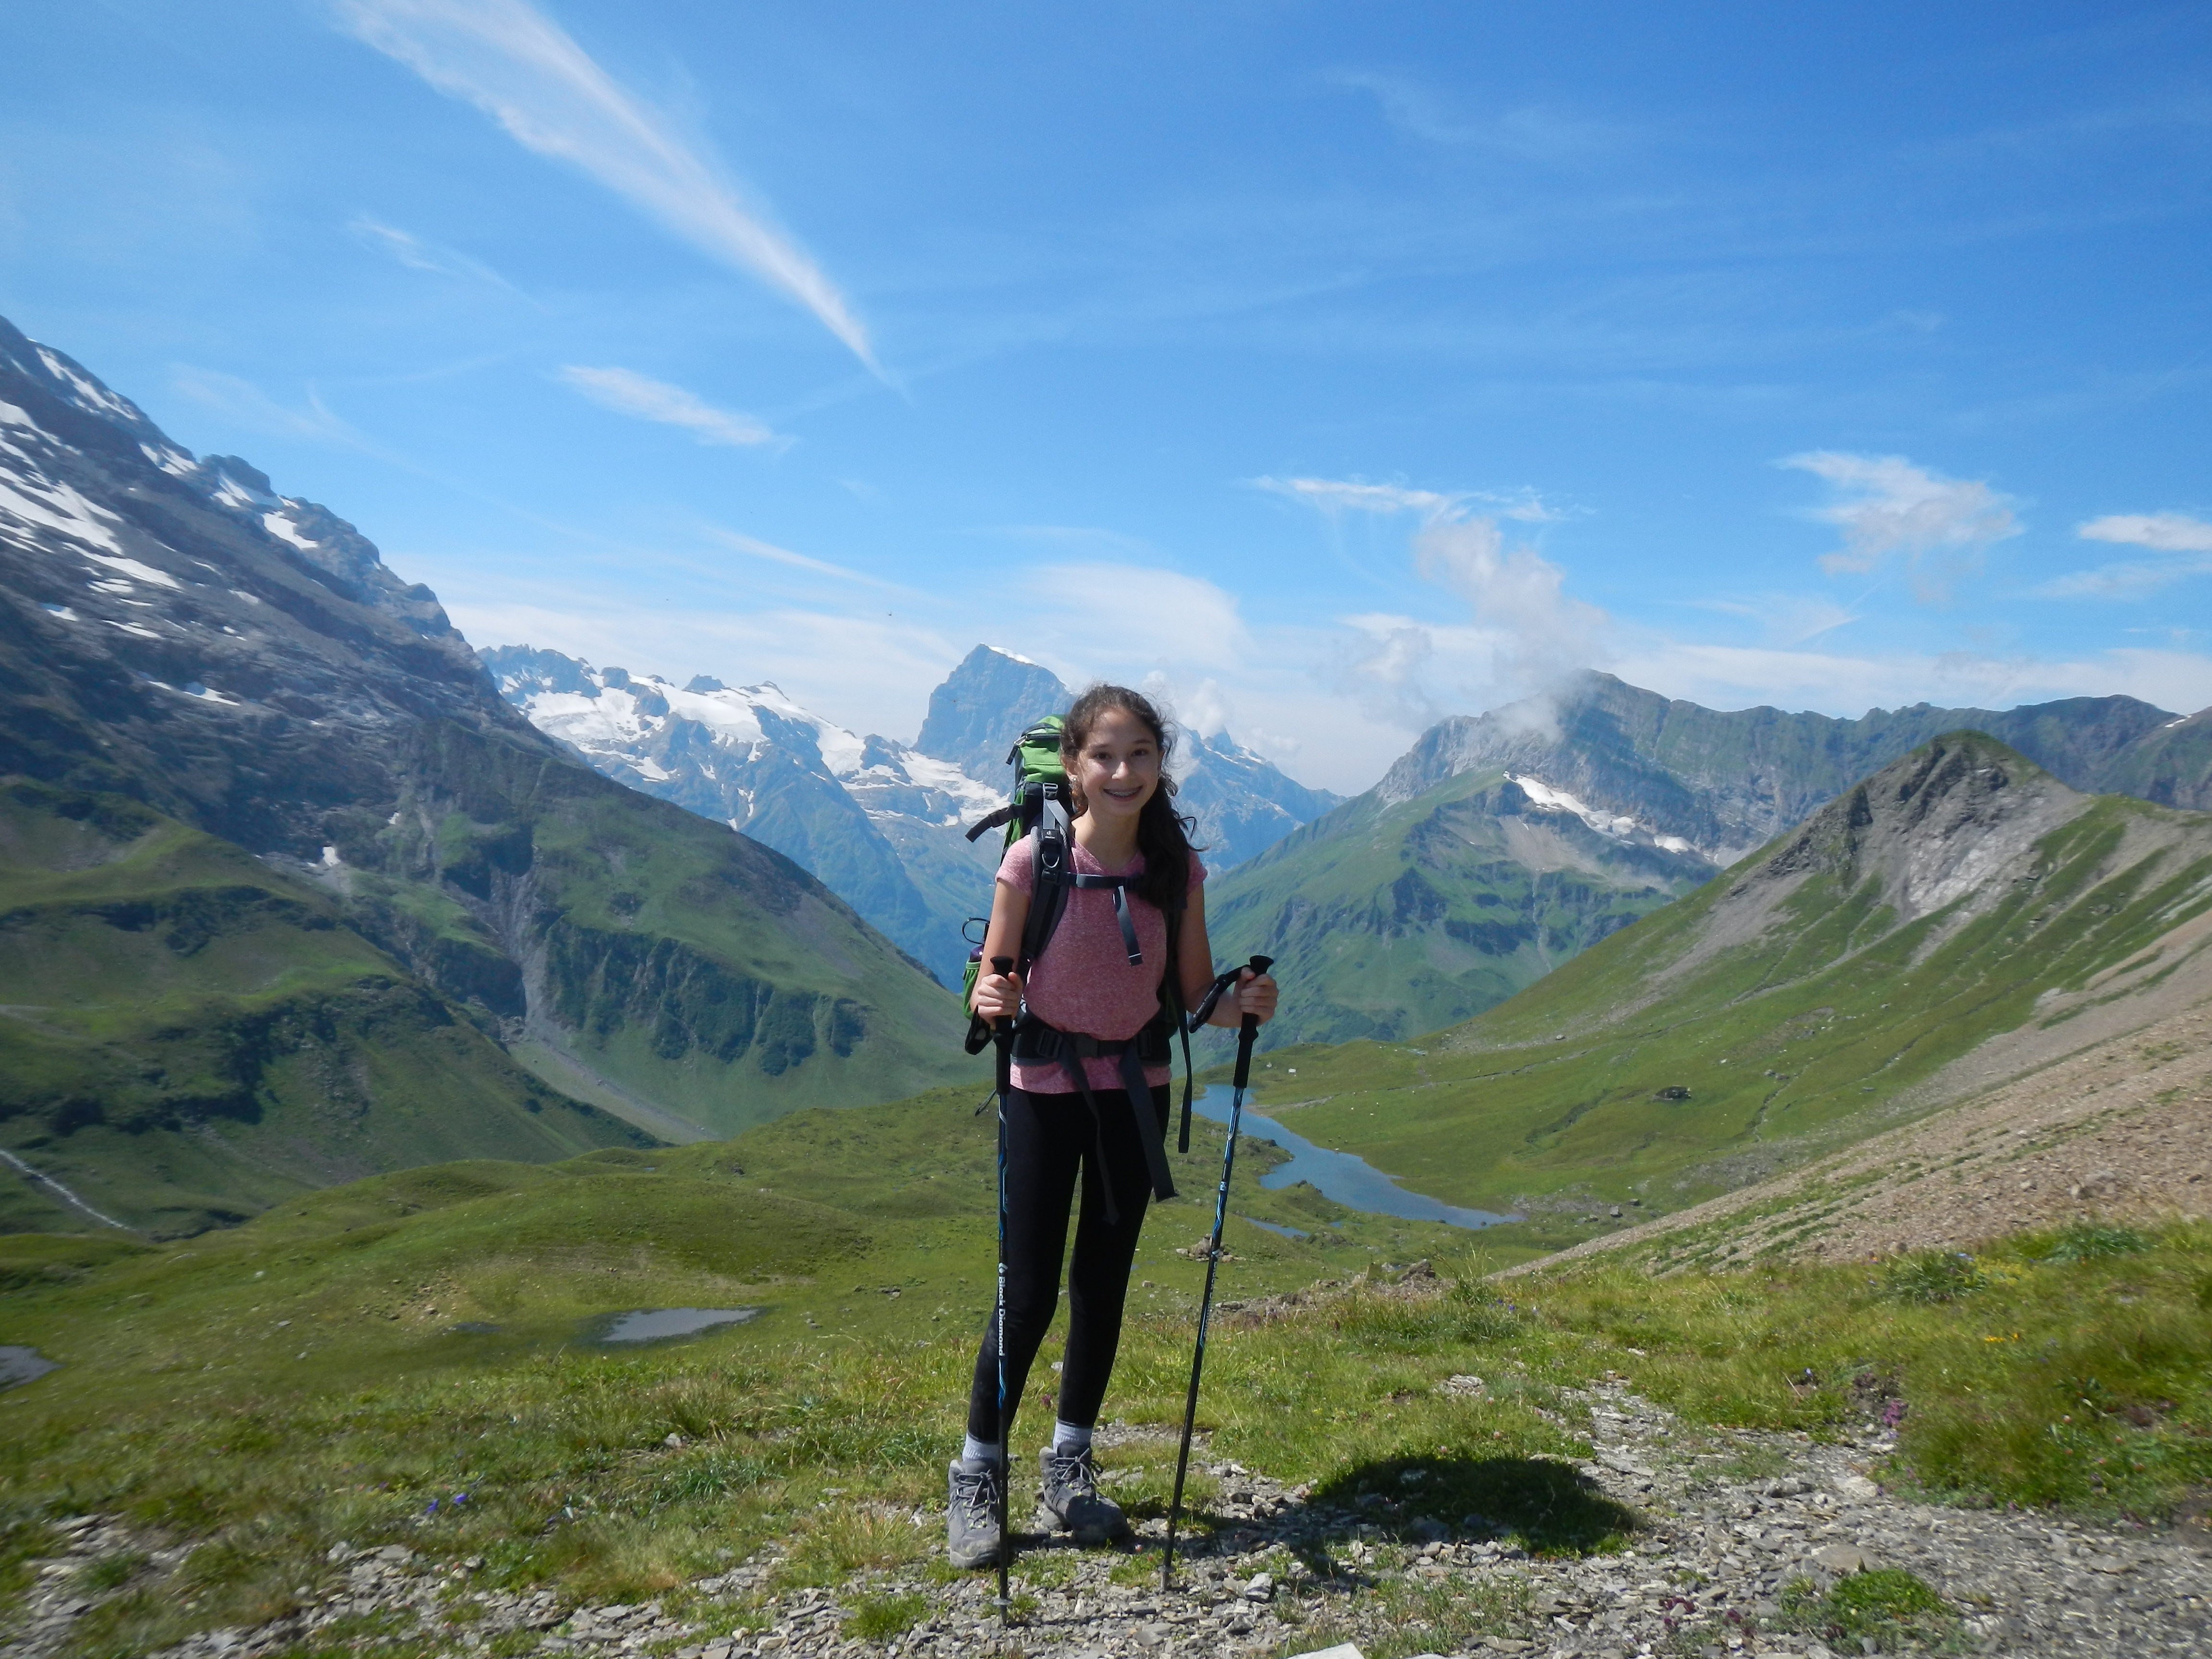 Hiking The Swiss Alps: Vacationing to a New Reality - My Family Travels